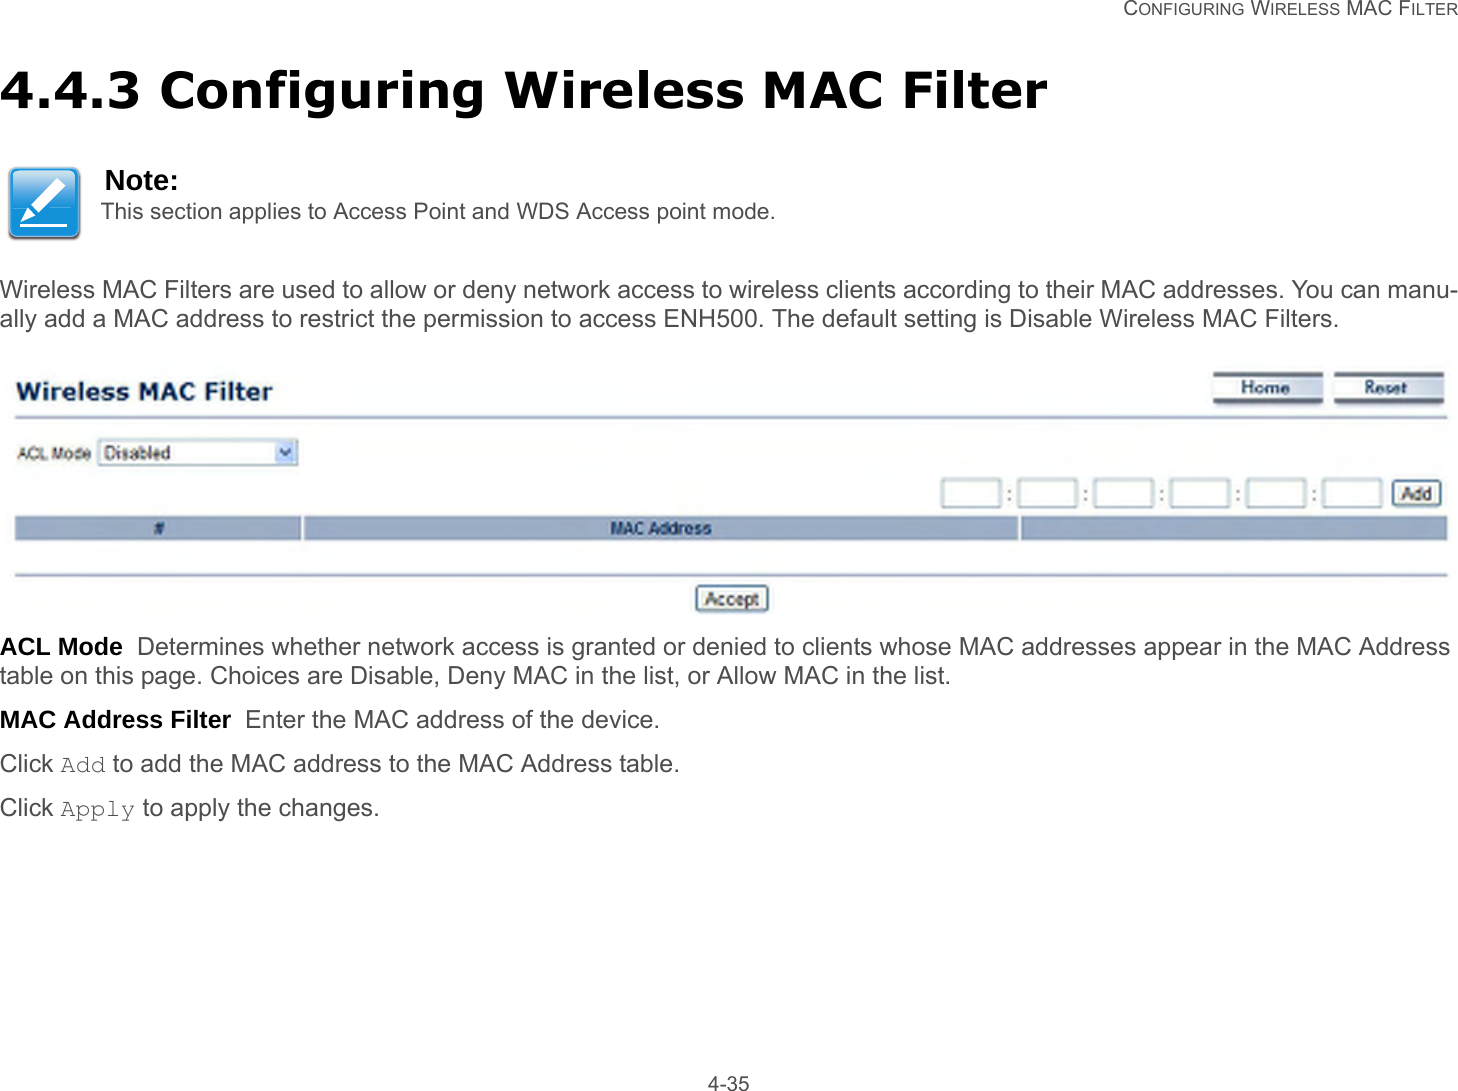   CONFIGURING WIRELESS MAC FILTER 4-354.4.3 Configuring Wireless MAC FilterWireless MAC Filters are used to allow or deny network access to wireless clients according to their MAC addresses. You can manu-ally add a MAC address to restrict the permission to access ENH500. The default setting is Disable Wireless MAC Filters.ACL Mode  Determines whether network access is granted or denied to clients whose MAC addresses appear in the MAC Address table on this page. Choices are Disable, Deny MAC in the list, or Allow MAC in the list.MAC Address Filter  Enter the MAC address of the device.Click Add to add the MAC address to the MAC Address table.Click Apply to apply the changes.Note:This section applies to Access Point and WDS Access point mode.